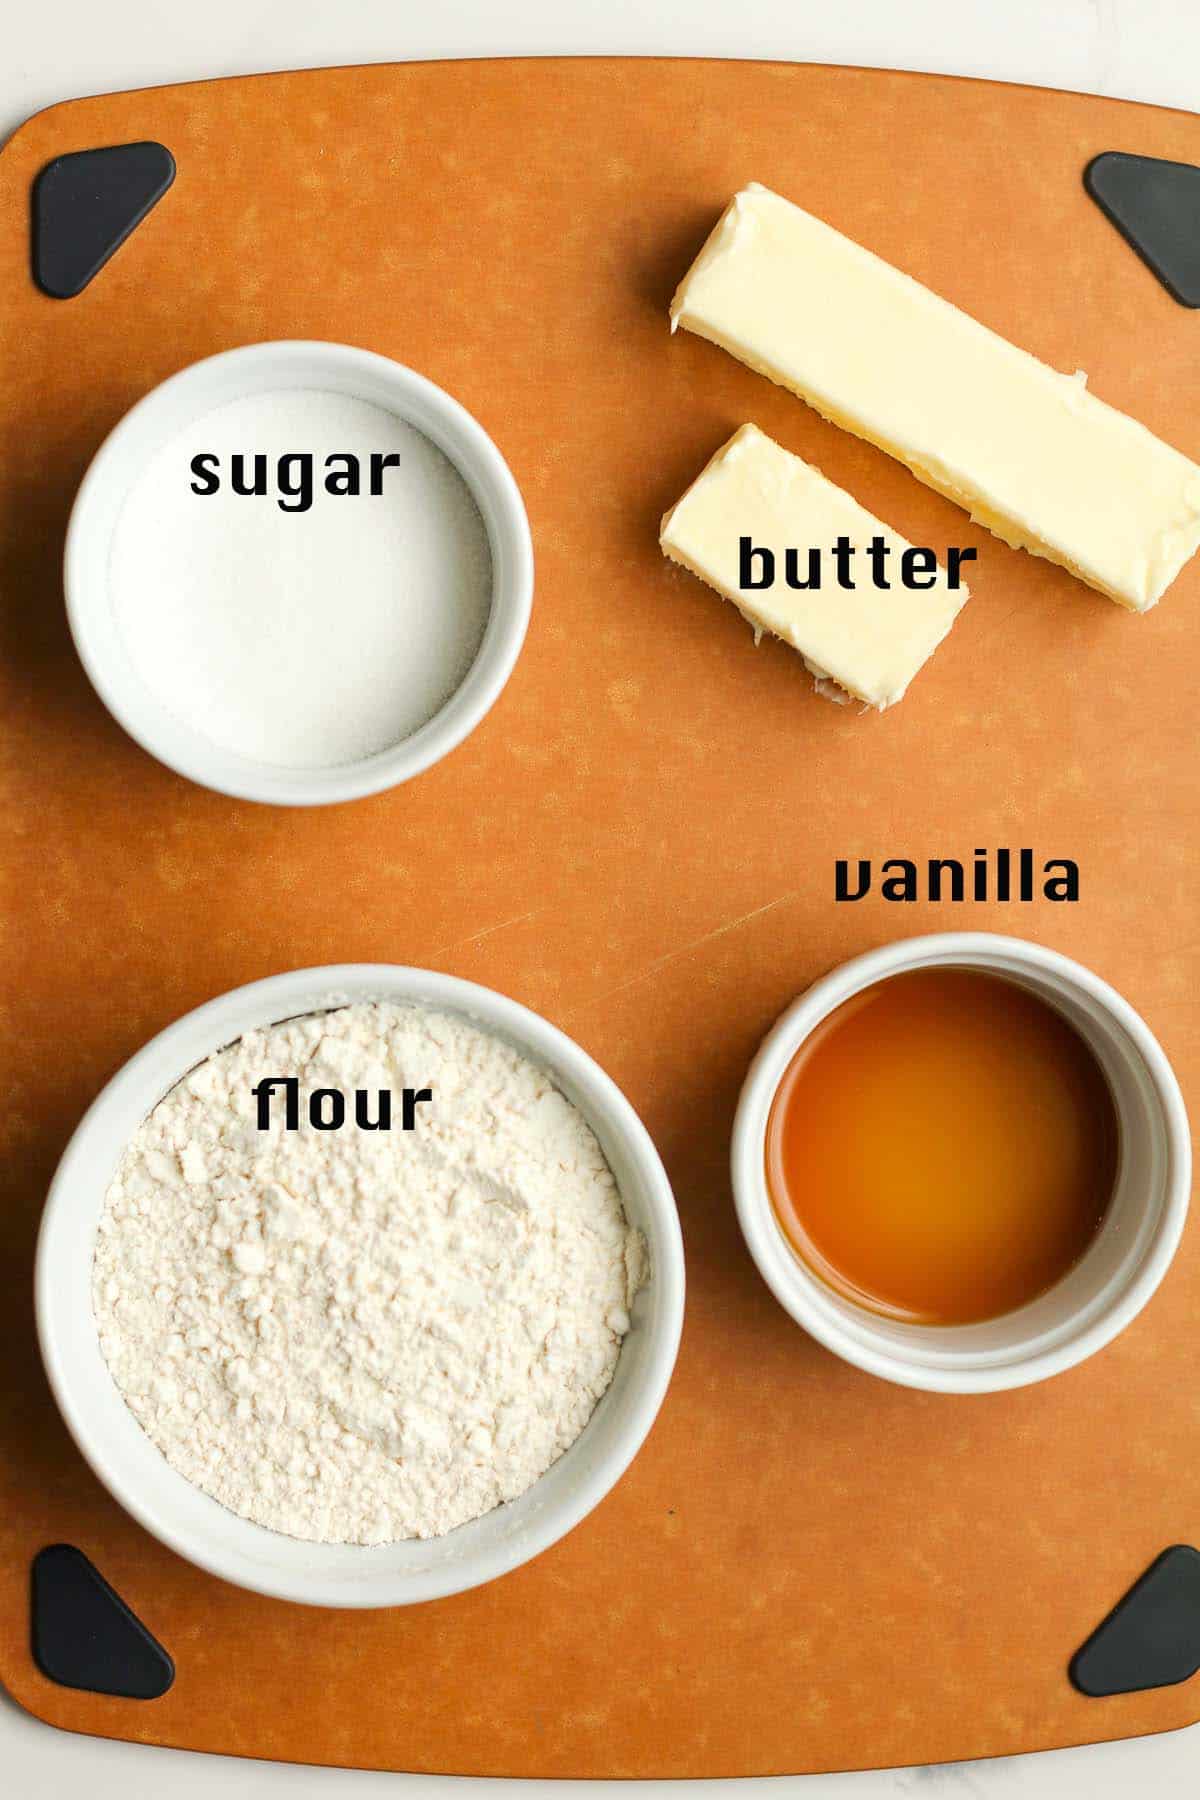 She labeled shortbread dough ingredients.